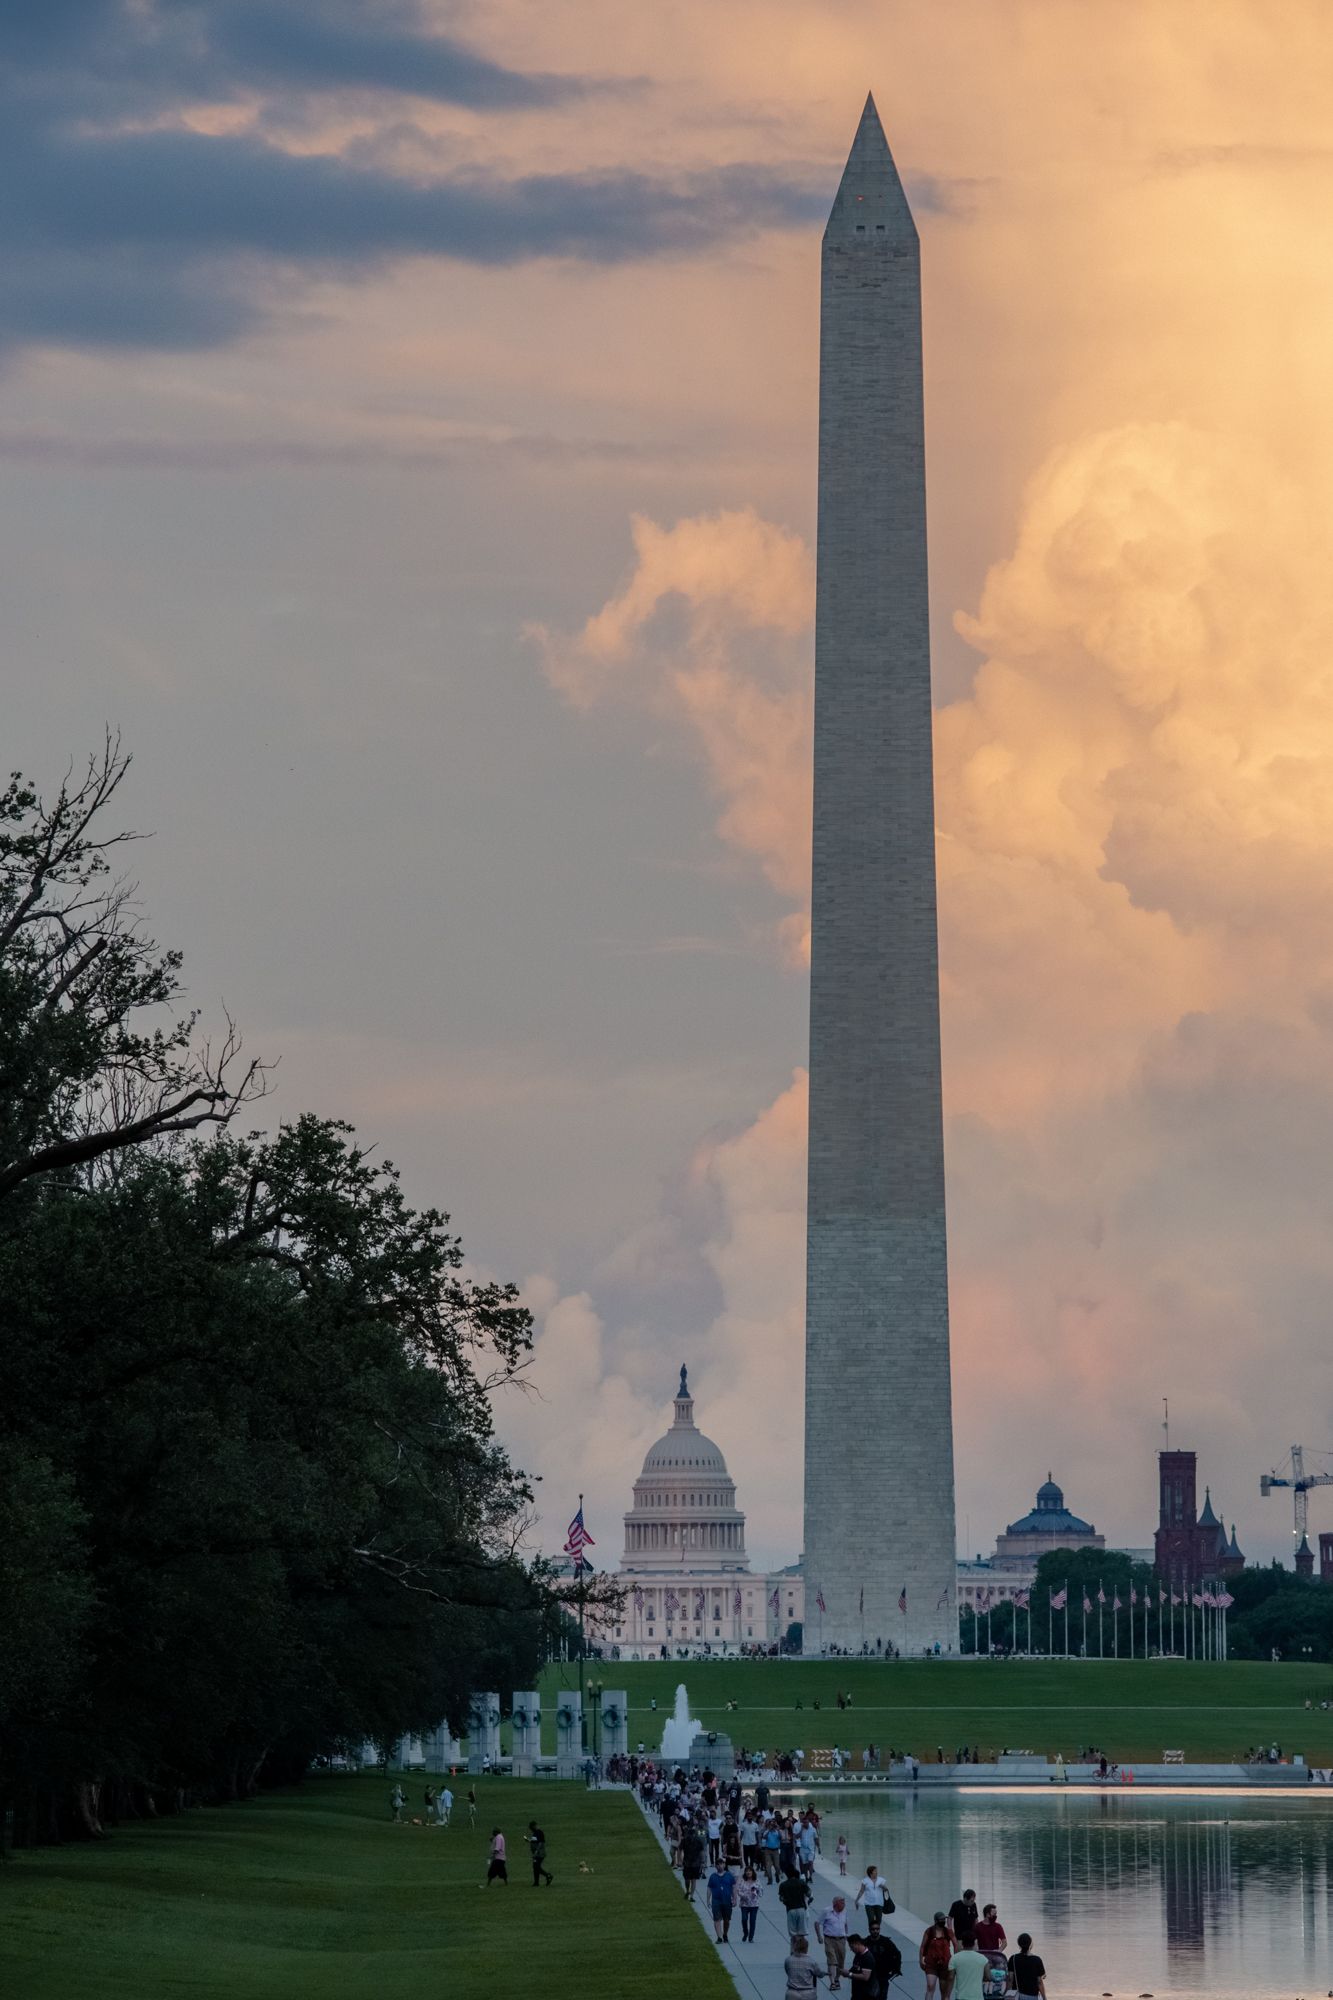 Stormy weather at dusk at the US Capitol Building and the Washington Memorial